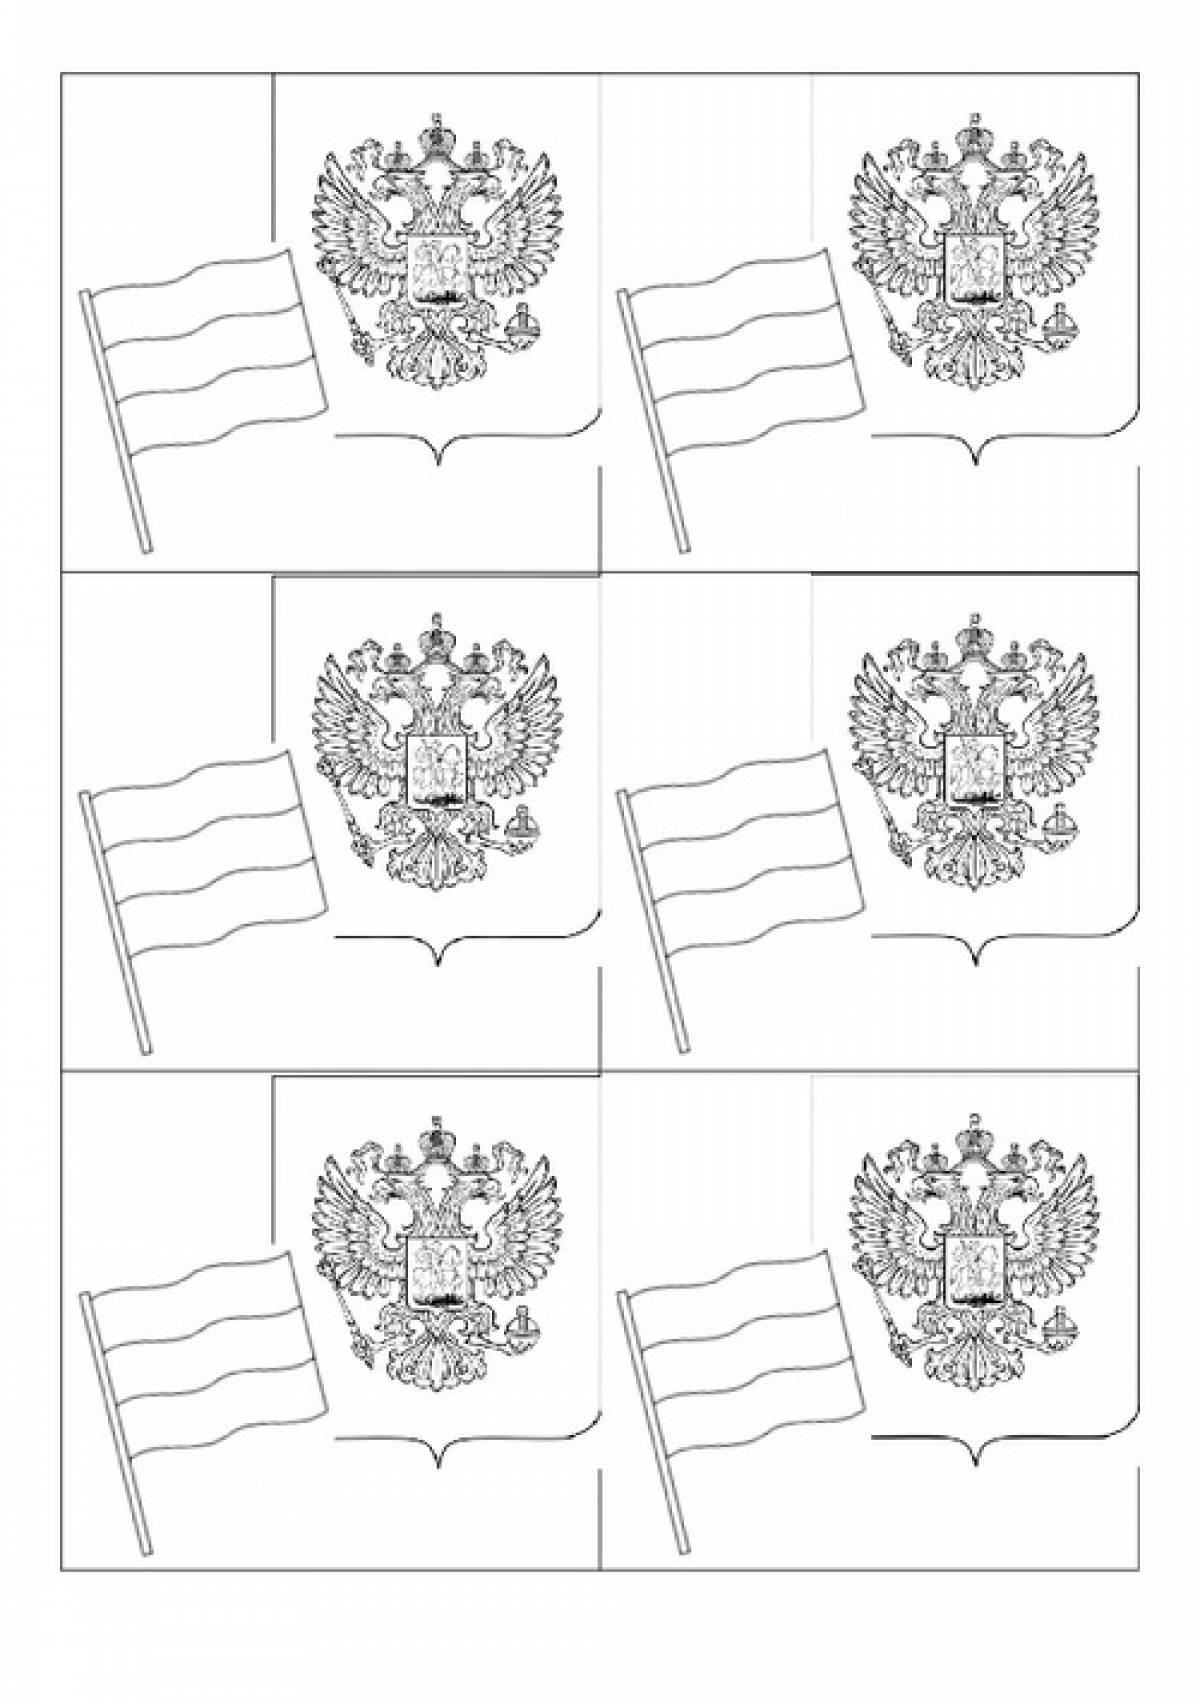 Flag and coat of arms coloring page